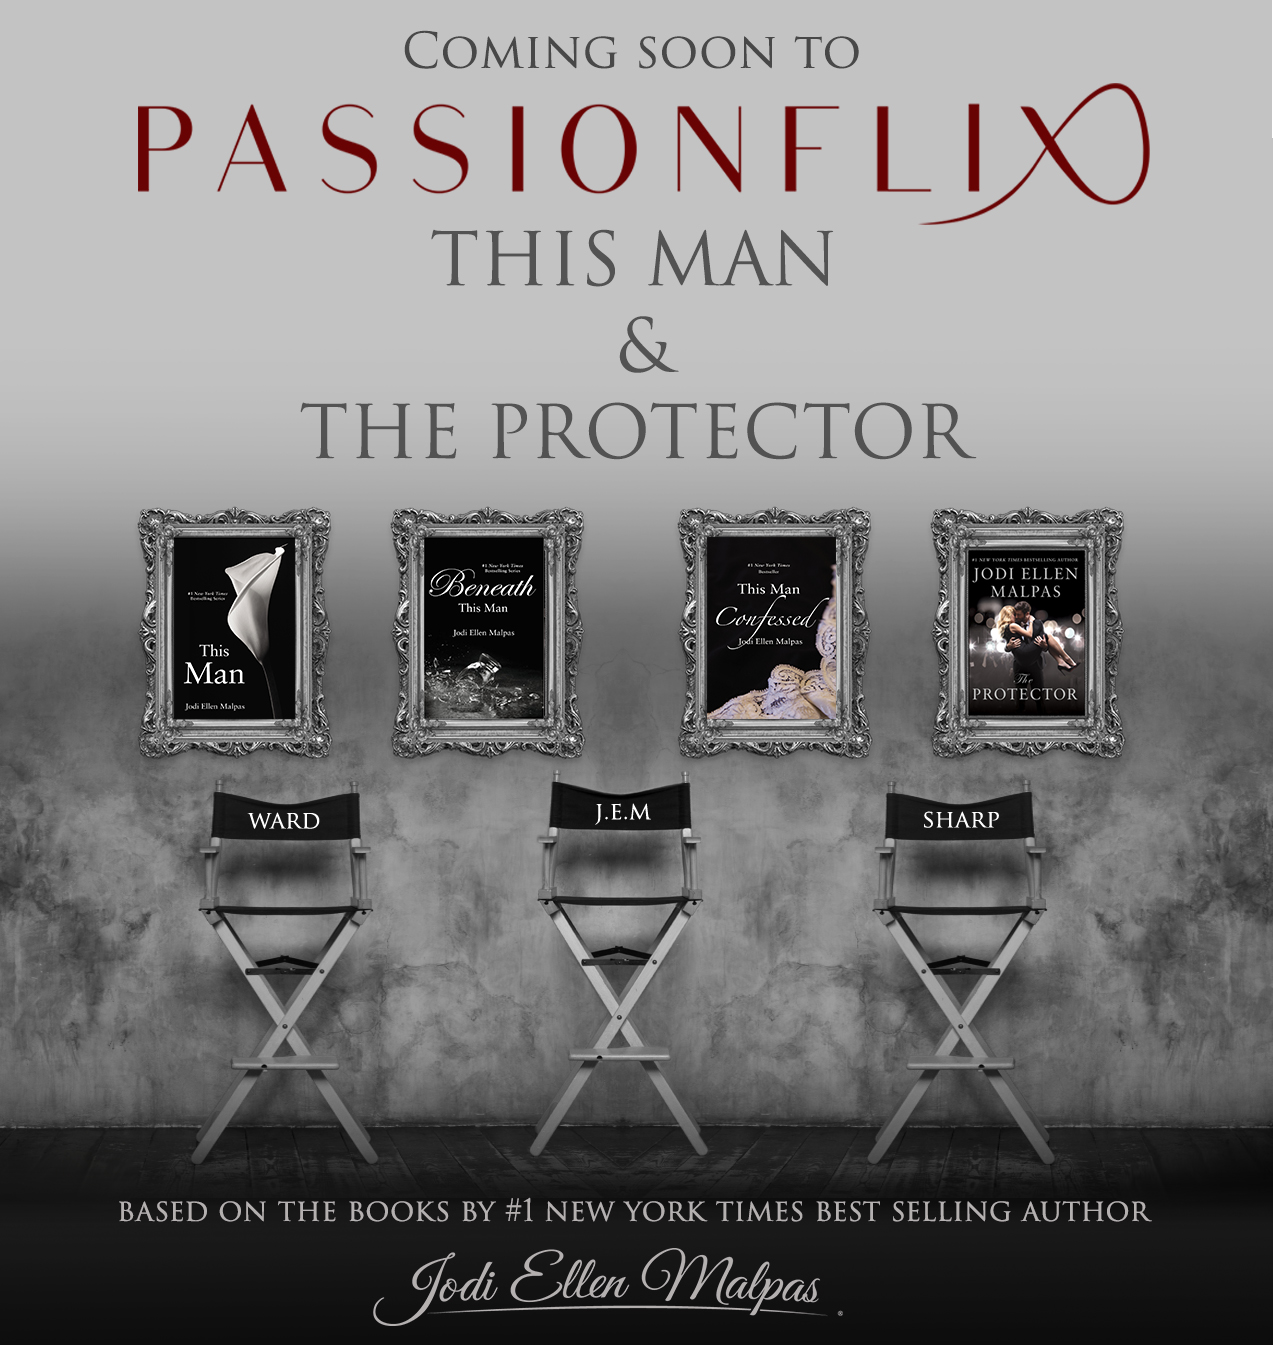 Passionflix this man movie